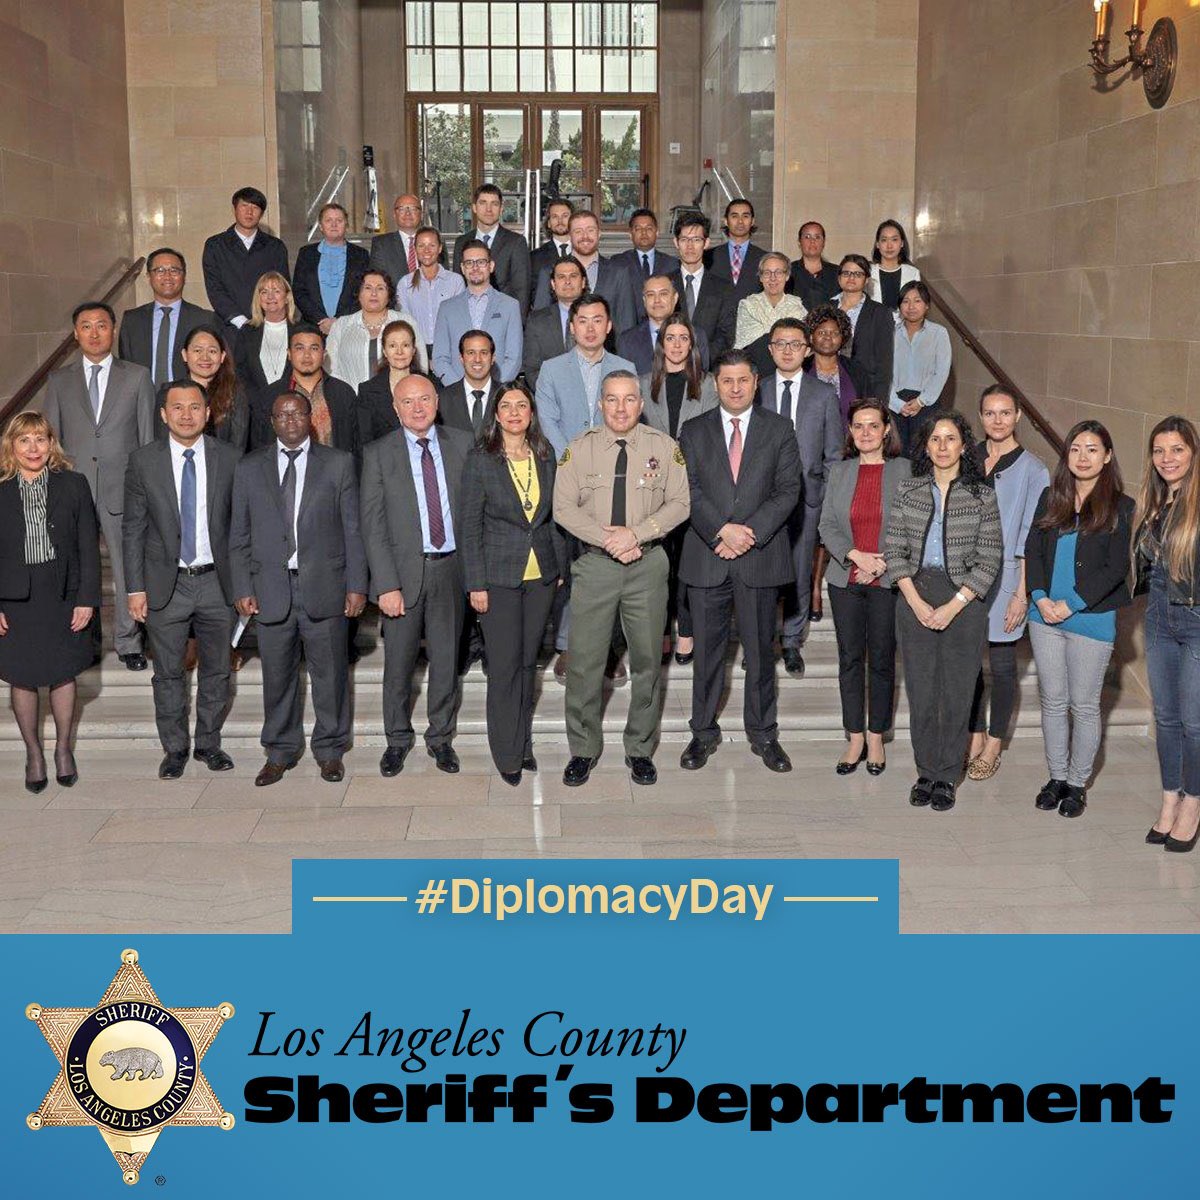 1st ever #DiplomacyDay is a great chance to celebrate #LASD’s robust partnership w/ diplomatic & consular community in @CountyofLA. 
@LASDHQ participates in #policediplomacy every day by exchanging best practices w/ int’l police & gov partners to improve policing worldwide.